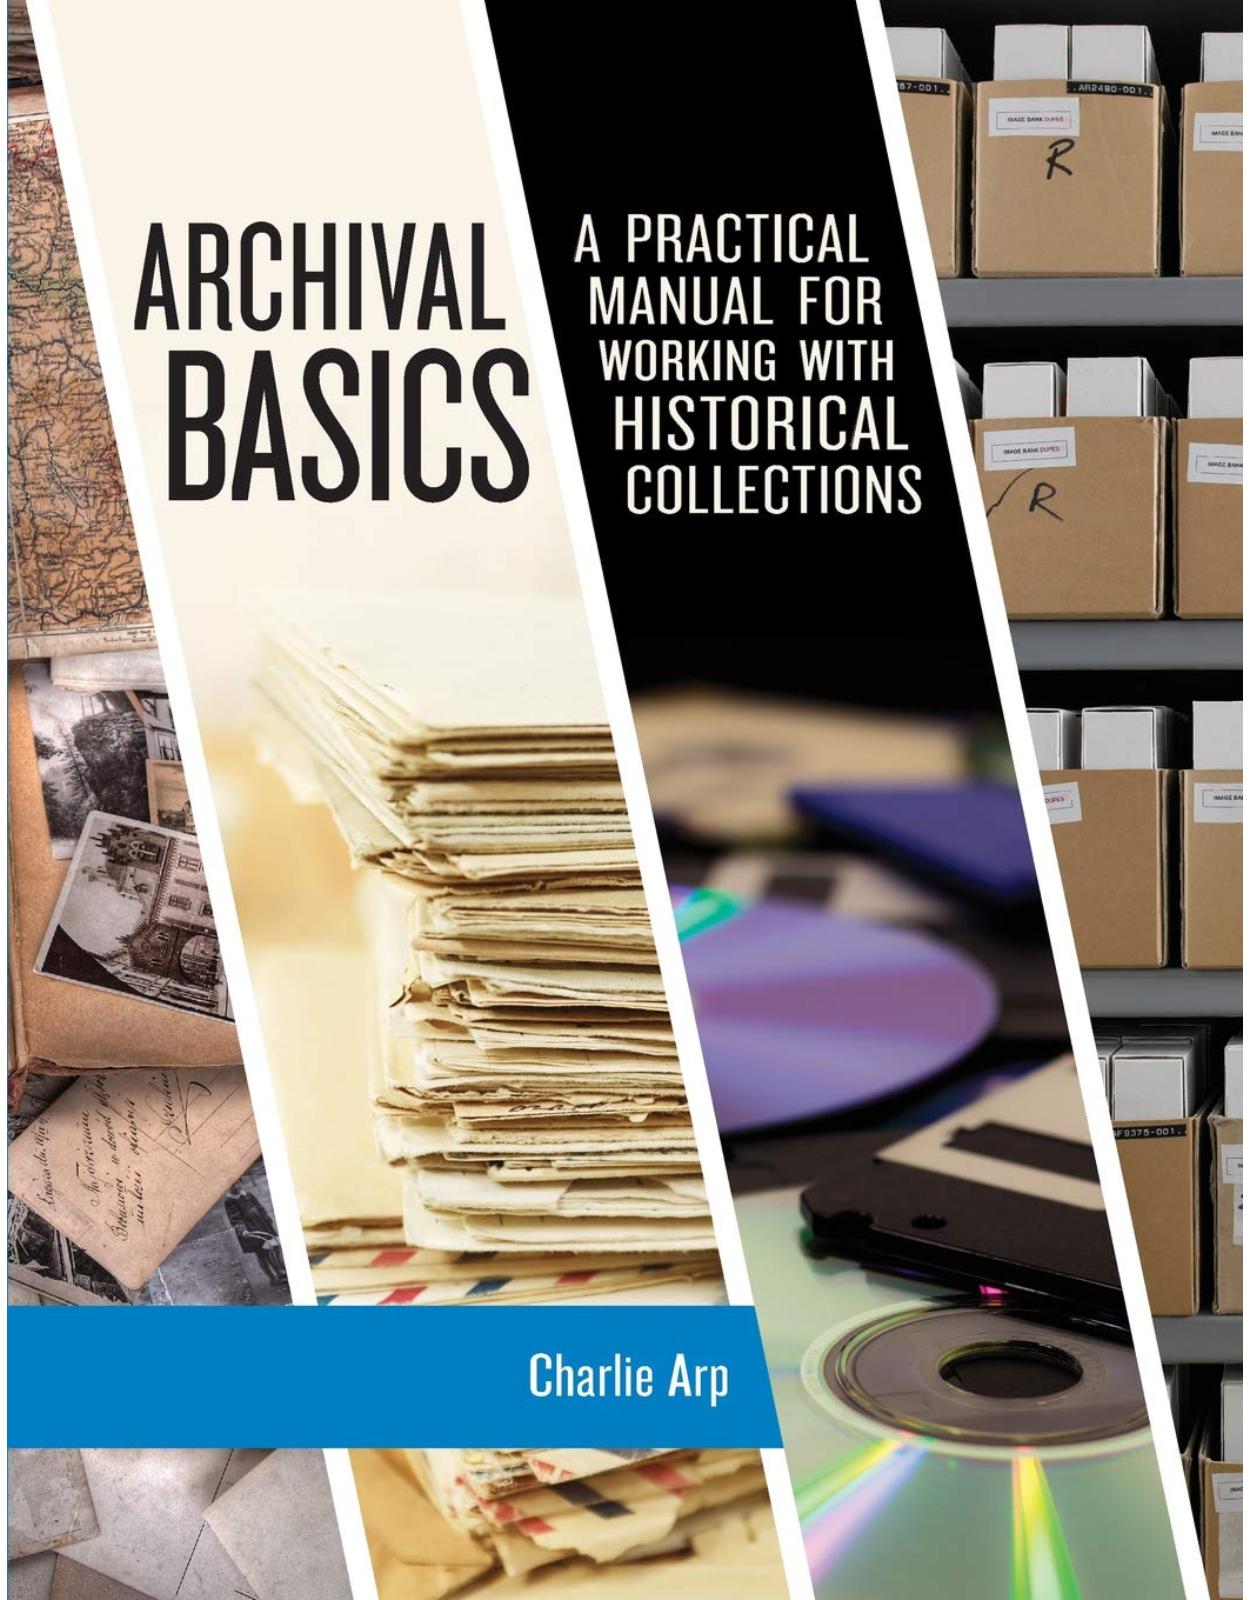 Archival Basics. A Practical Manual for Working with Historical Collections